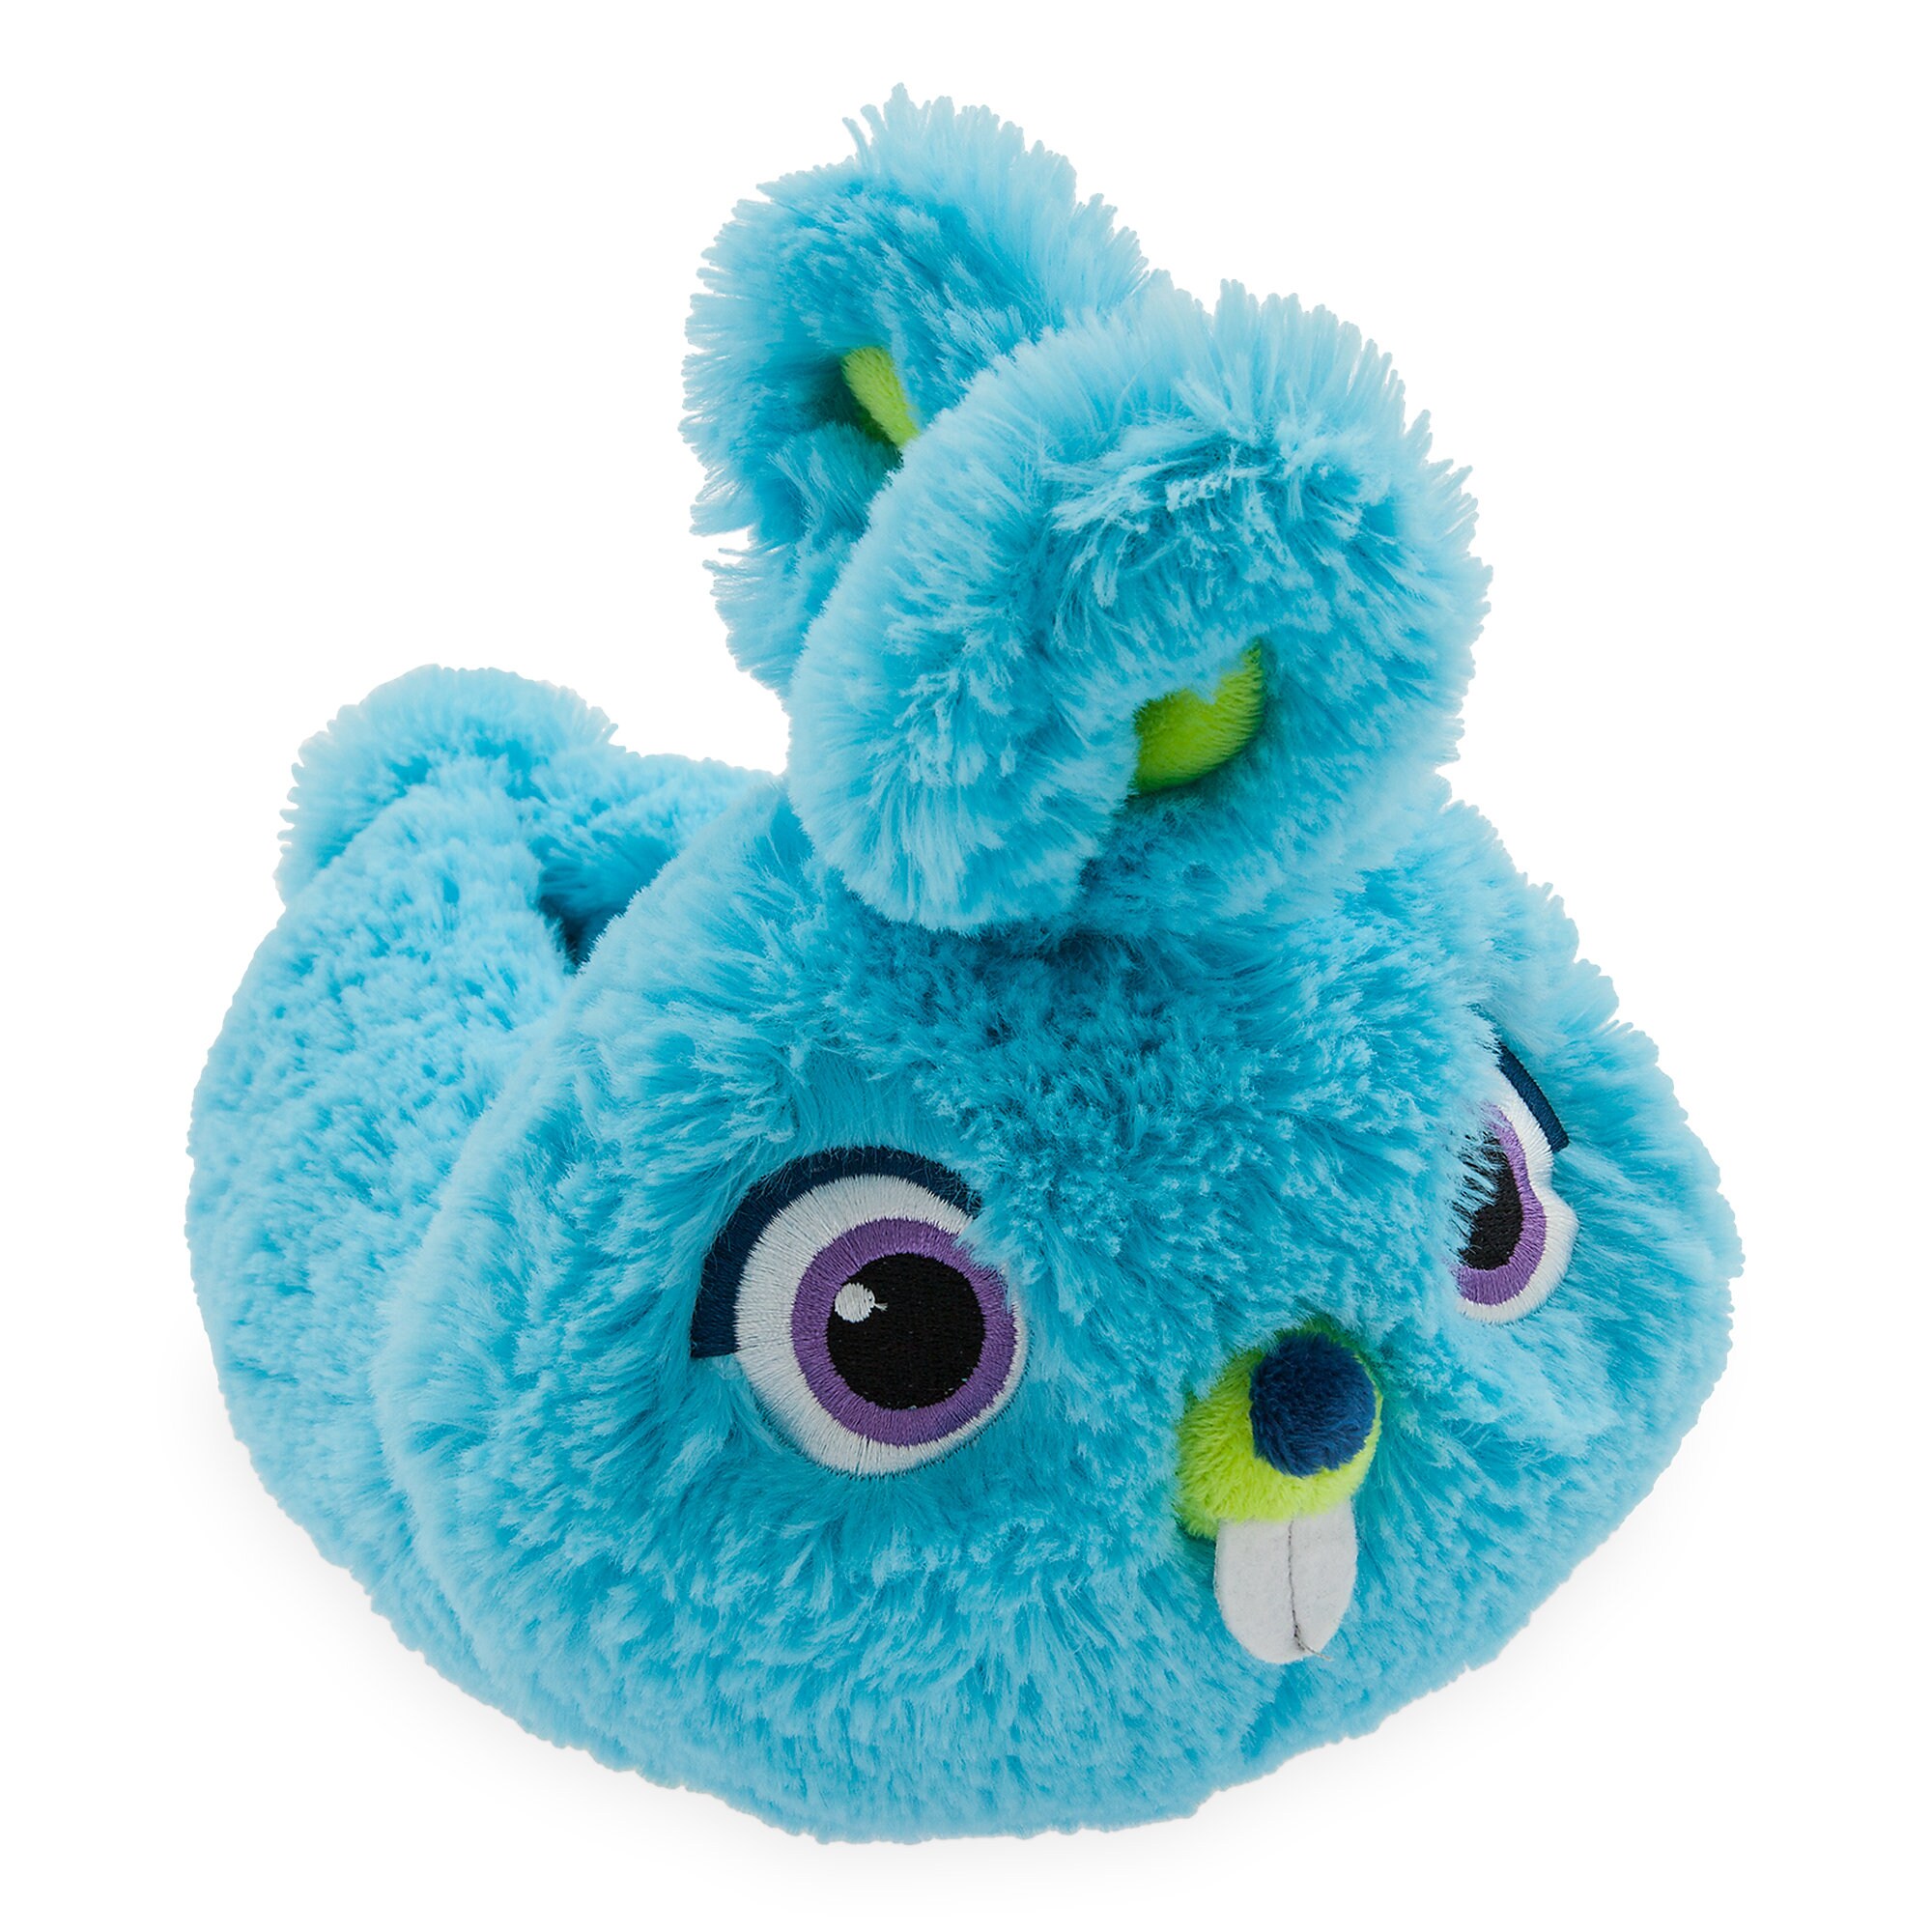 Ducky and Bunny Slippers for Kids - Toy Story 4